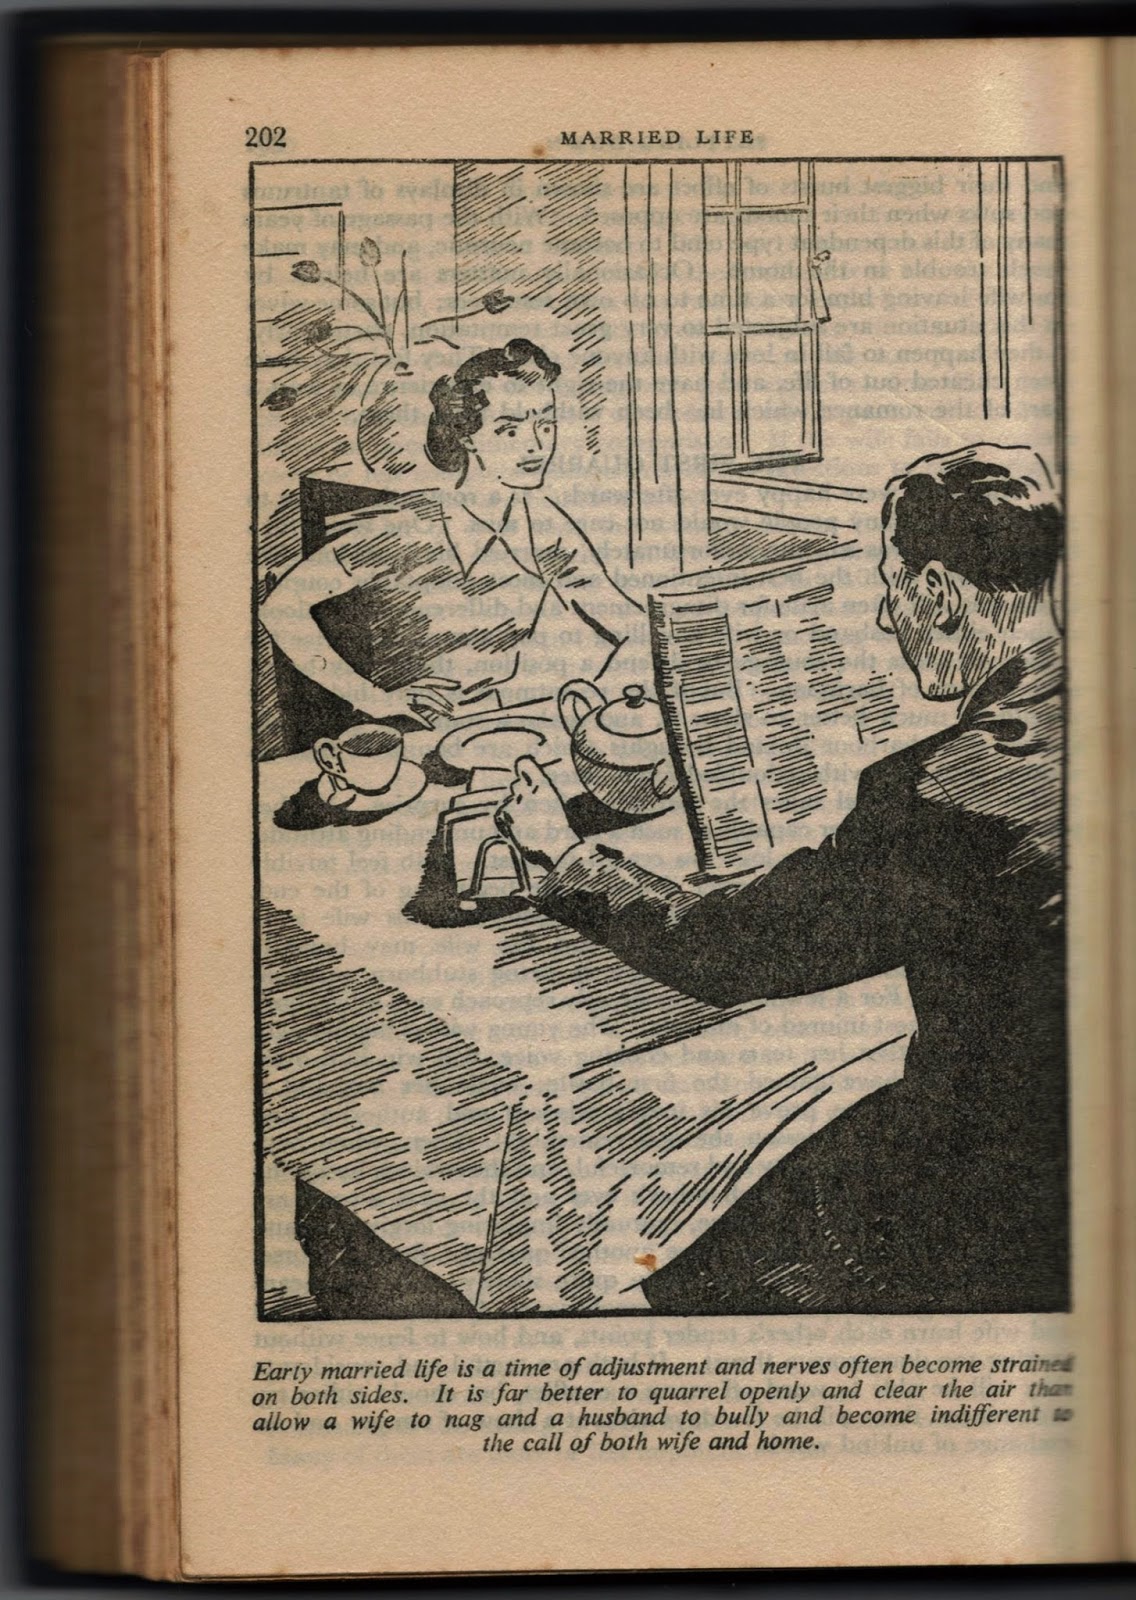 Self help marriage problems from 1939